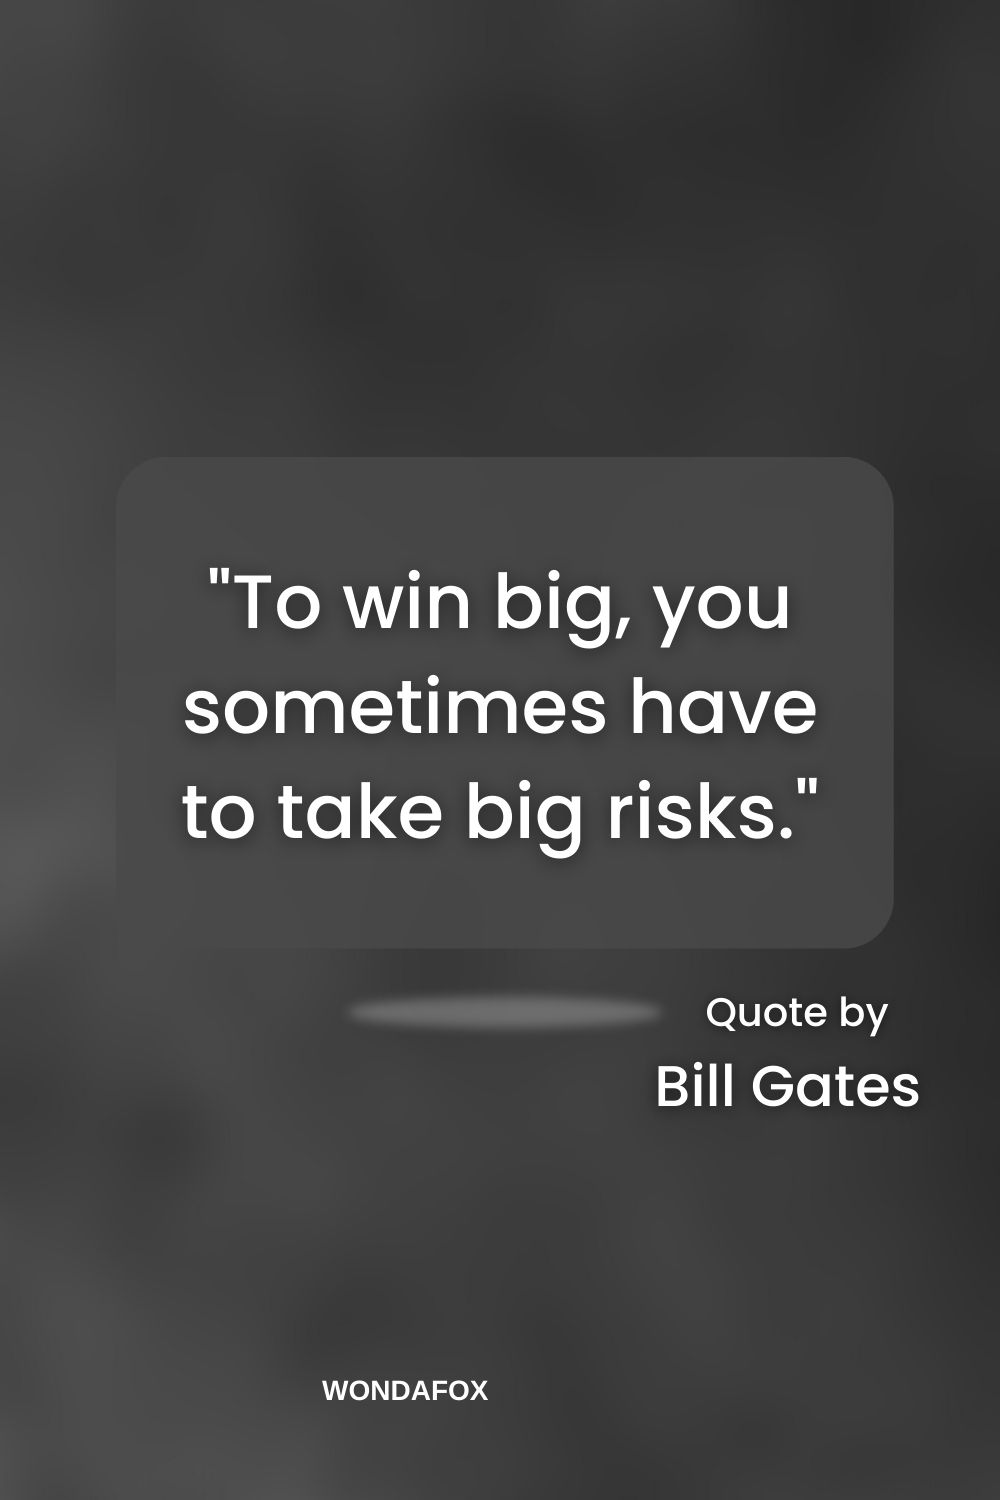 "To win big, you sometimes have to take big risks."
Bill Gates